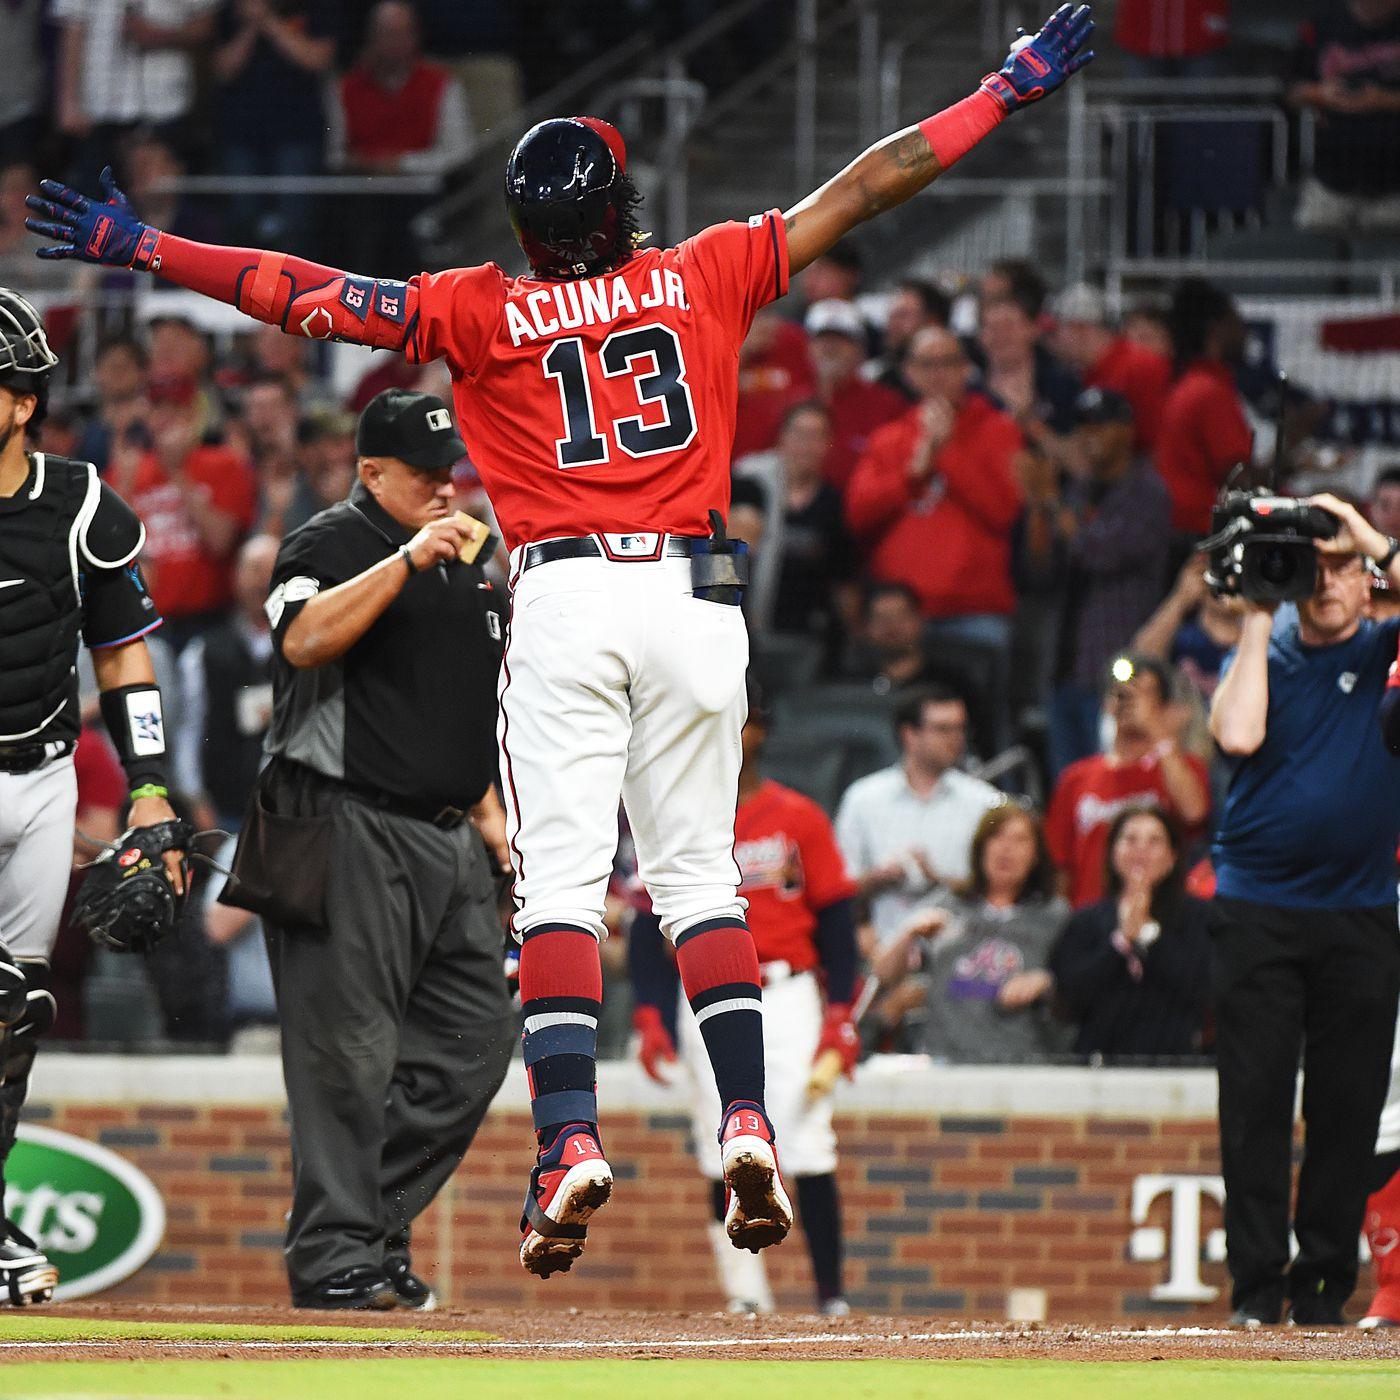 VIDEO: Ronald Acuña Jr. homers seconds after “sophomore